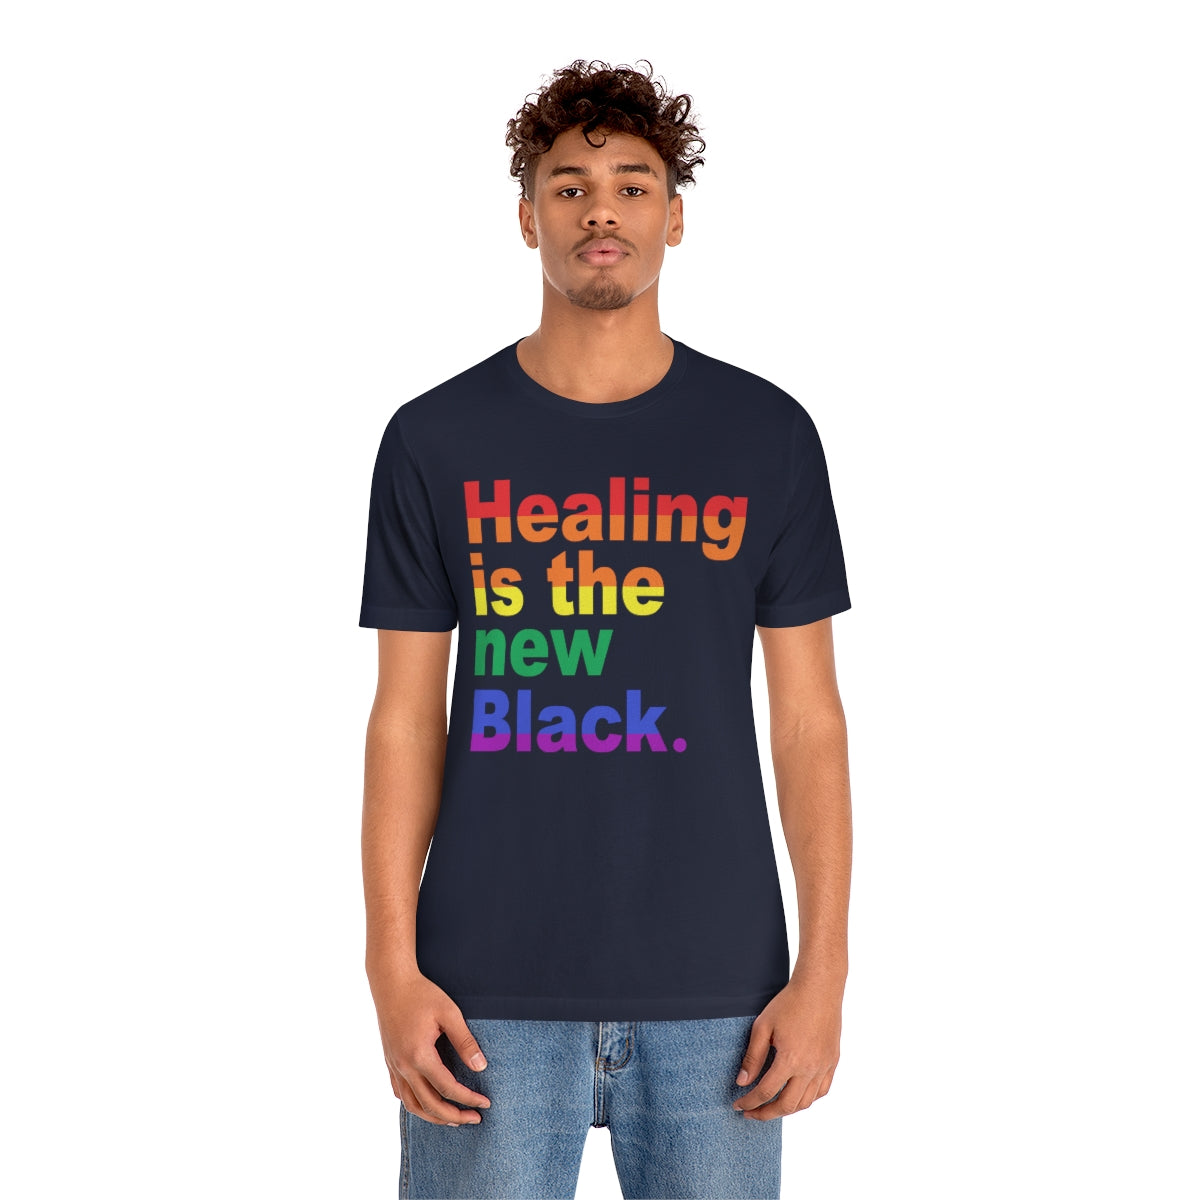 Copy of Copy of Copy of Healing is the New Black Tee